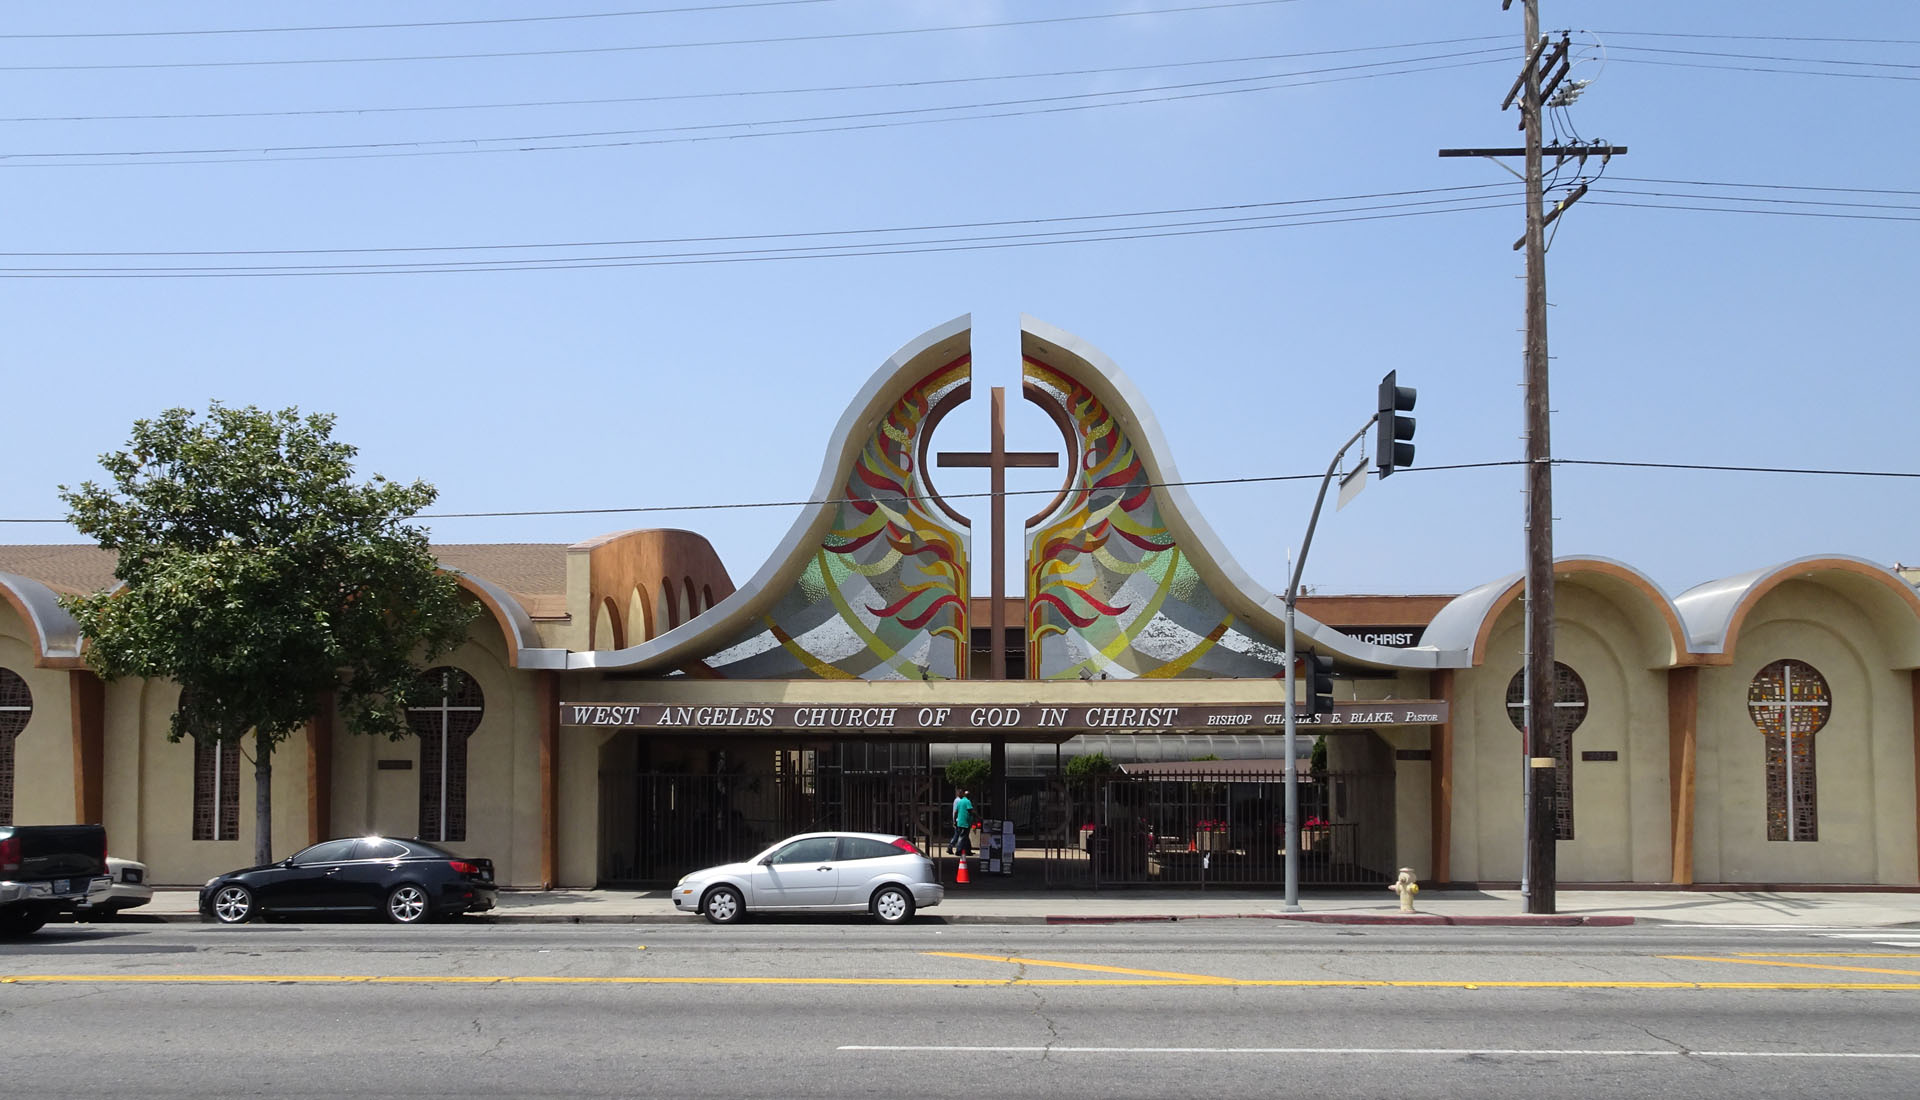 West Angeles Church of God in Christ, North Campus